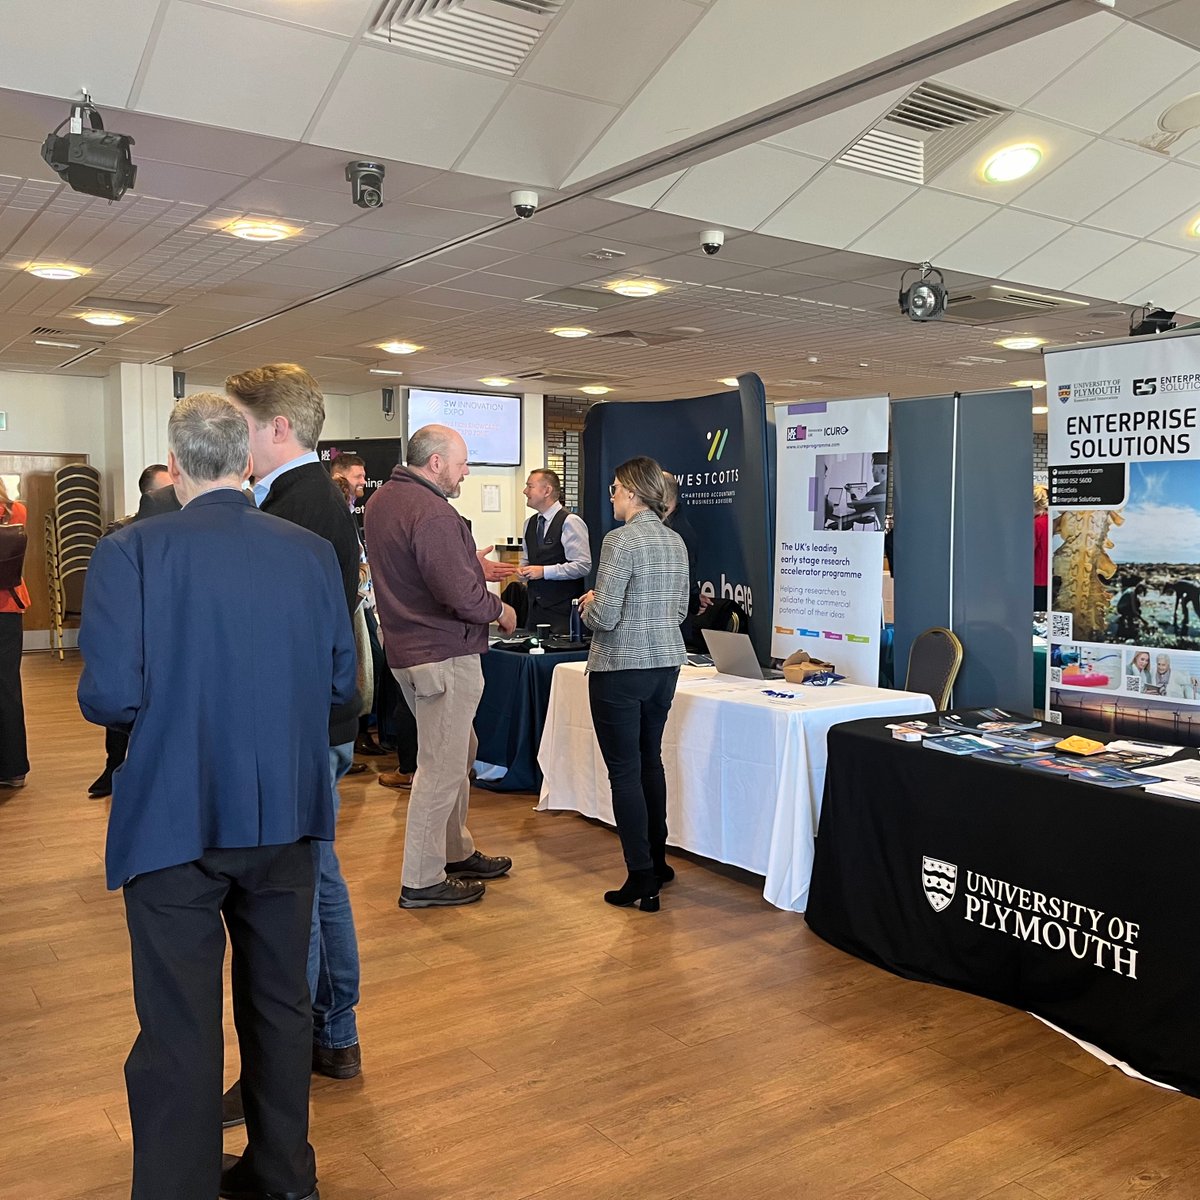 Another packed out Exeter Suite is always fantastic to see! 🤩 Great to have the South West Innovation Expo here at Sandy Park with such a variety of stands 👊 #SandyParkExeter #Events